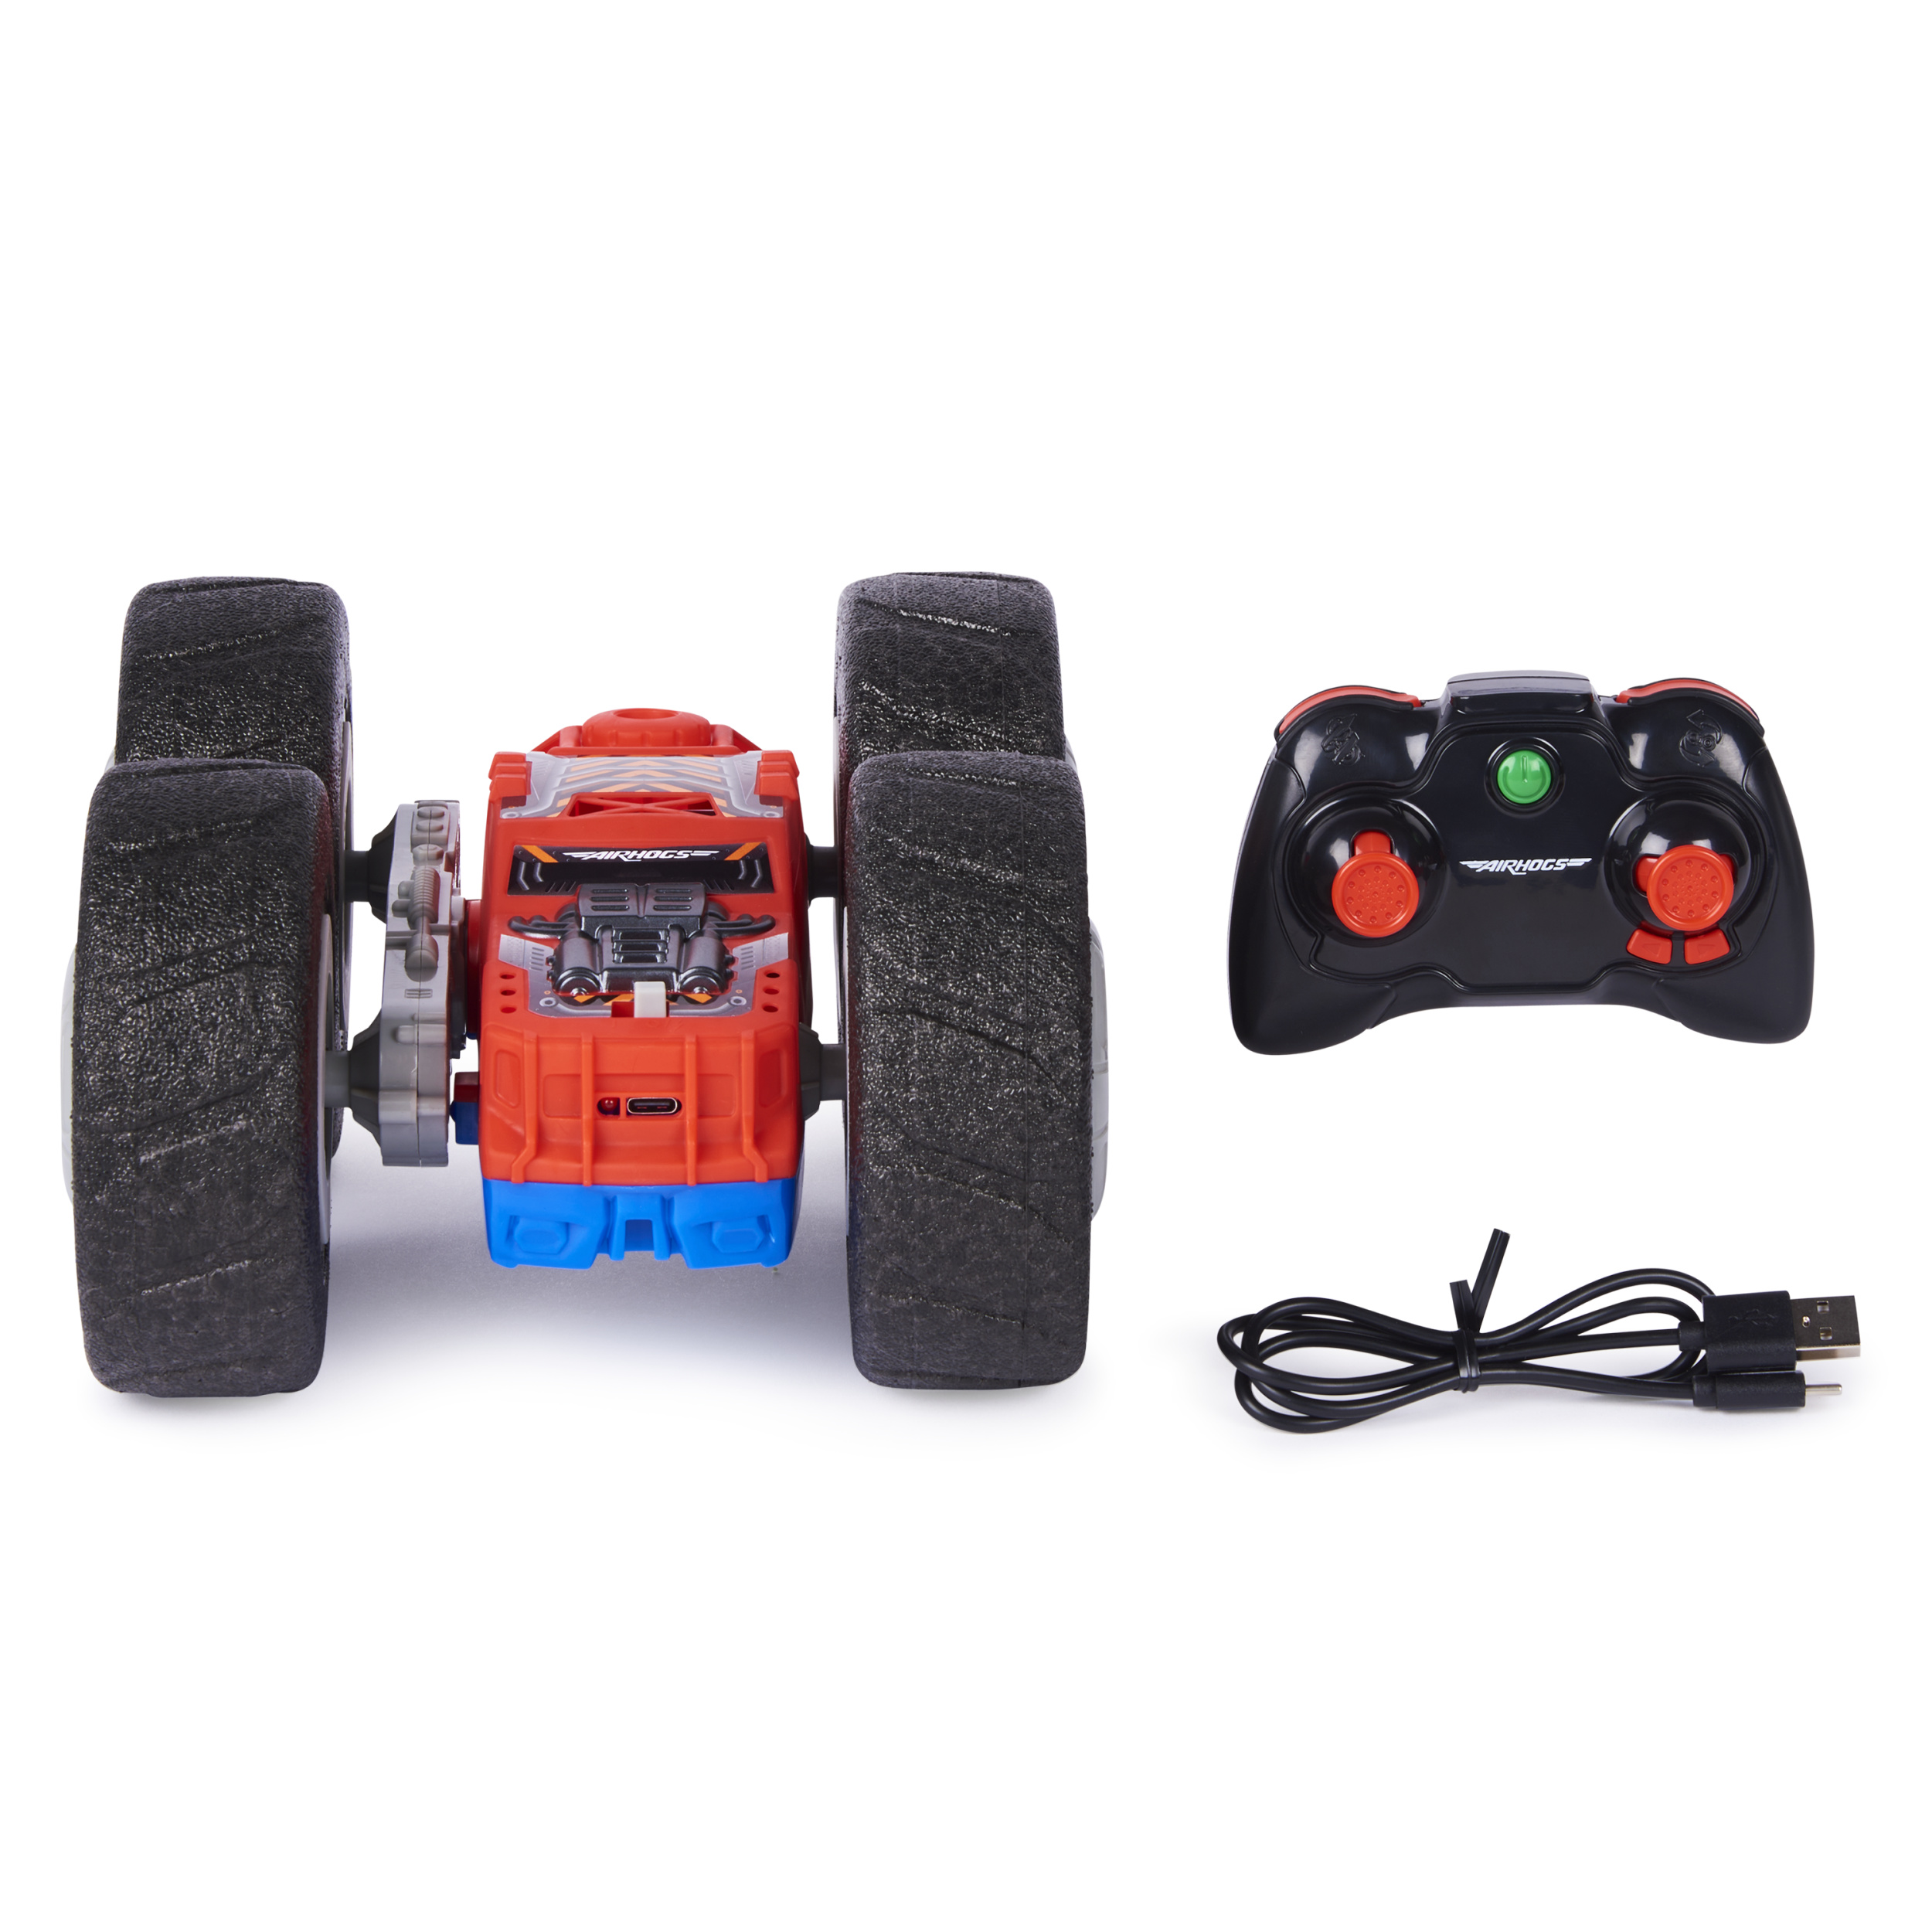 Air Hogs Super Soft, Flippin Frenzy 2-in-1 Stunt RC Vehicle - image 5 of 6